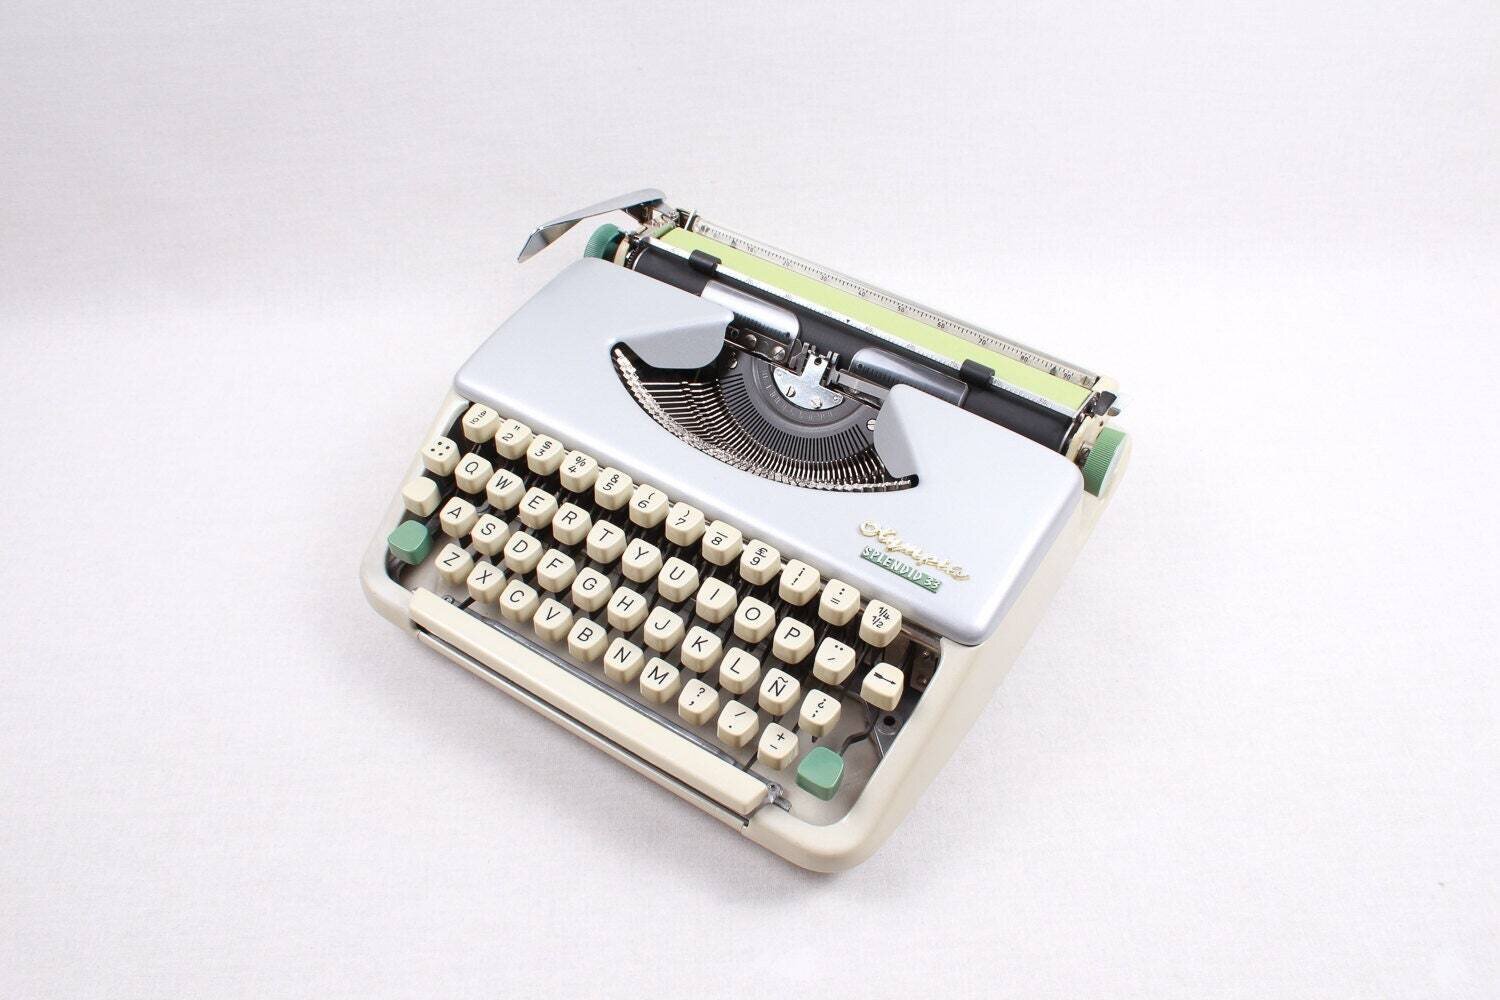 Olympia Splendid 33 Cream & Silver Typewriter, Vintage, Mint Condition, Manual Portable, Professionally Serviced by Typewriter.Company